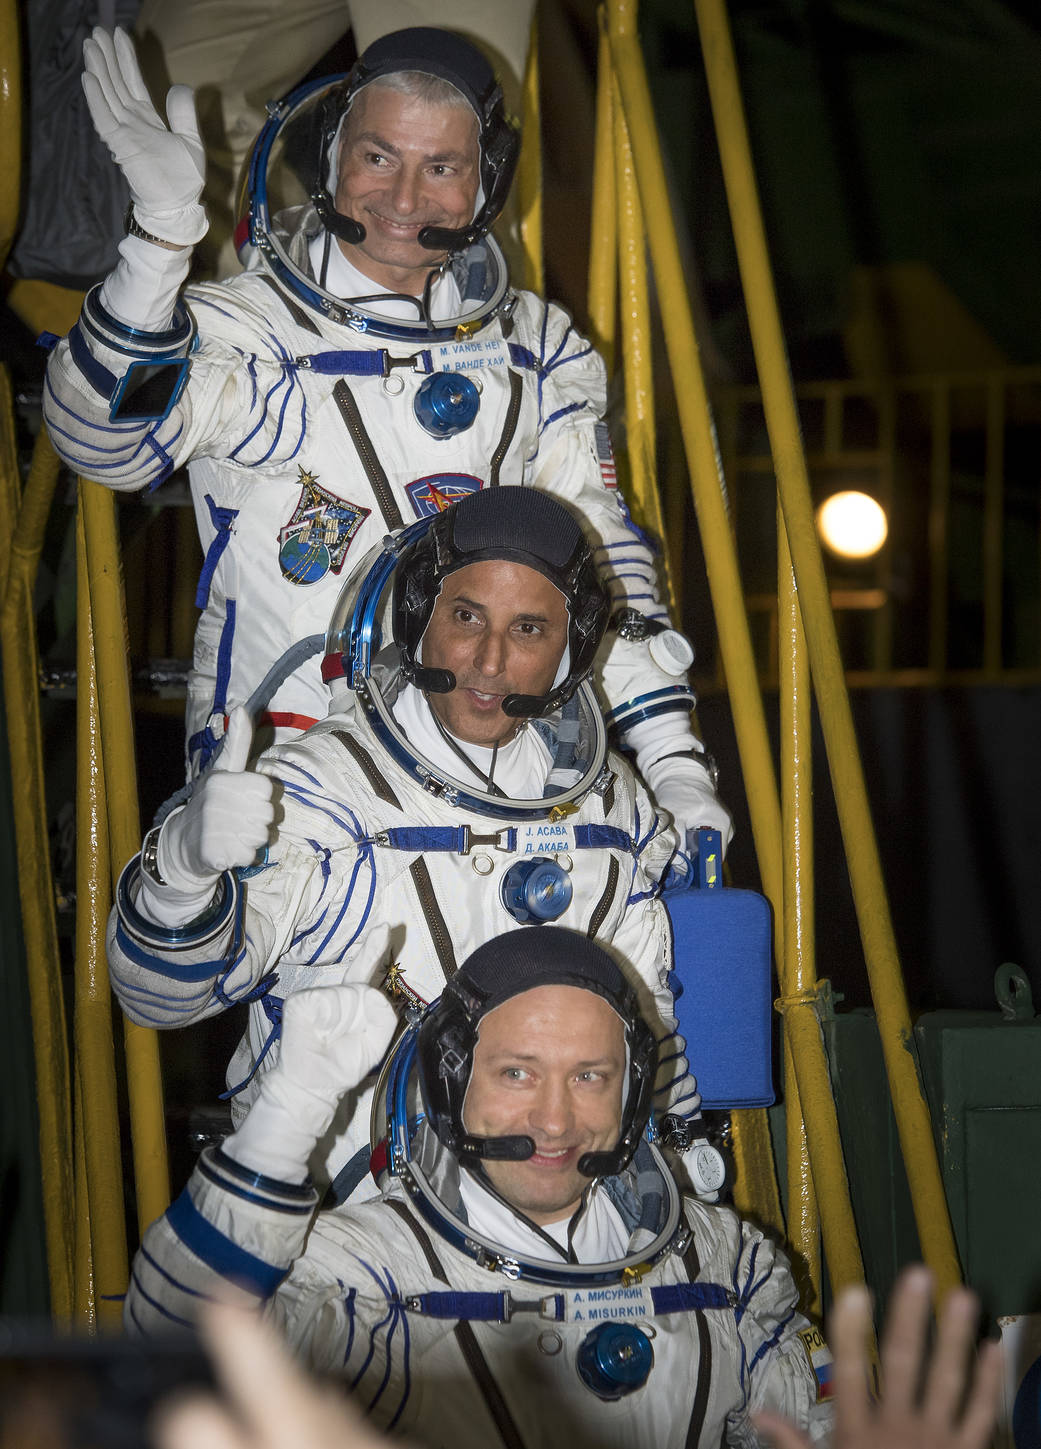 Three astronauts in Sokol suits wave farewell before boarding Soyuz